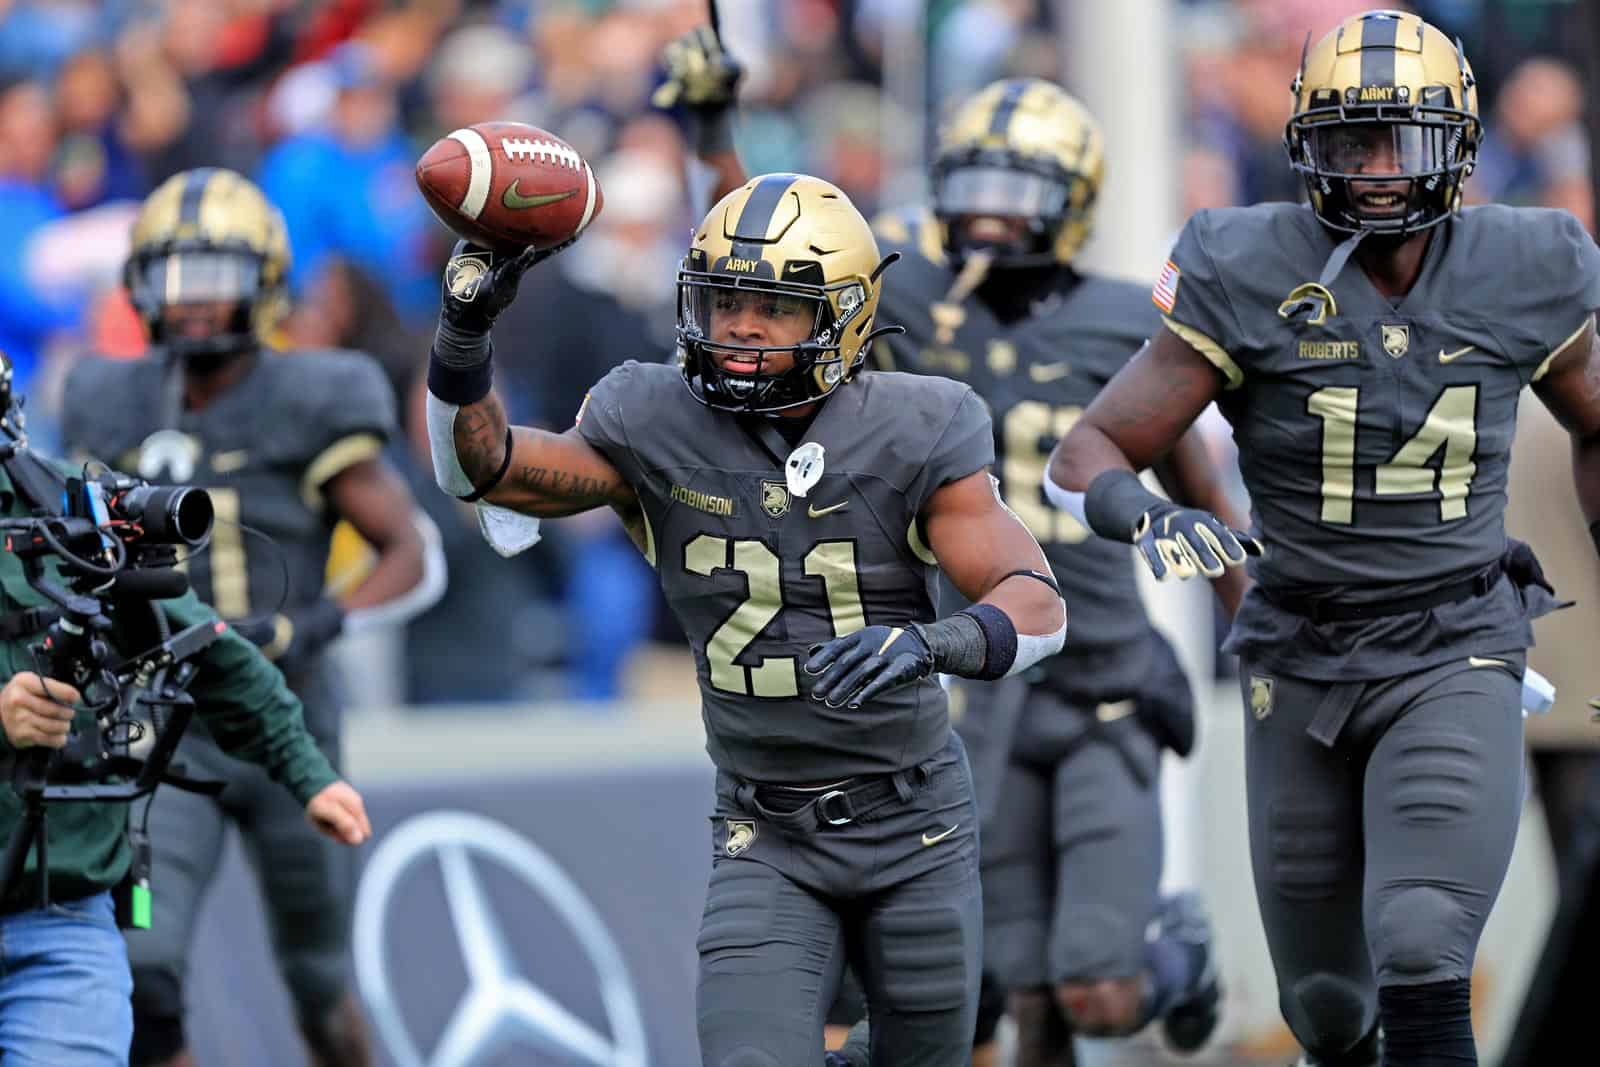 Army replaces canceled Tennessee game with Villanova on 2022